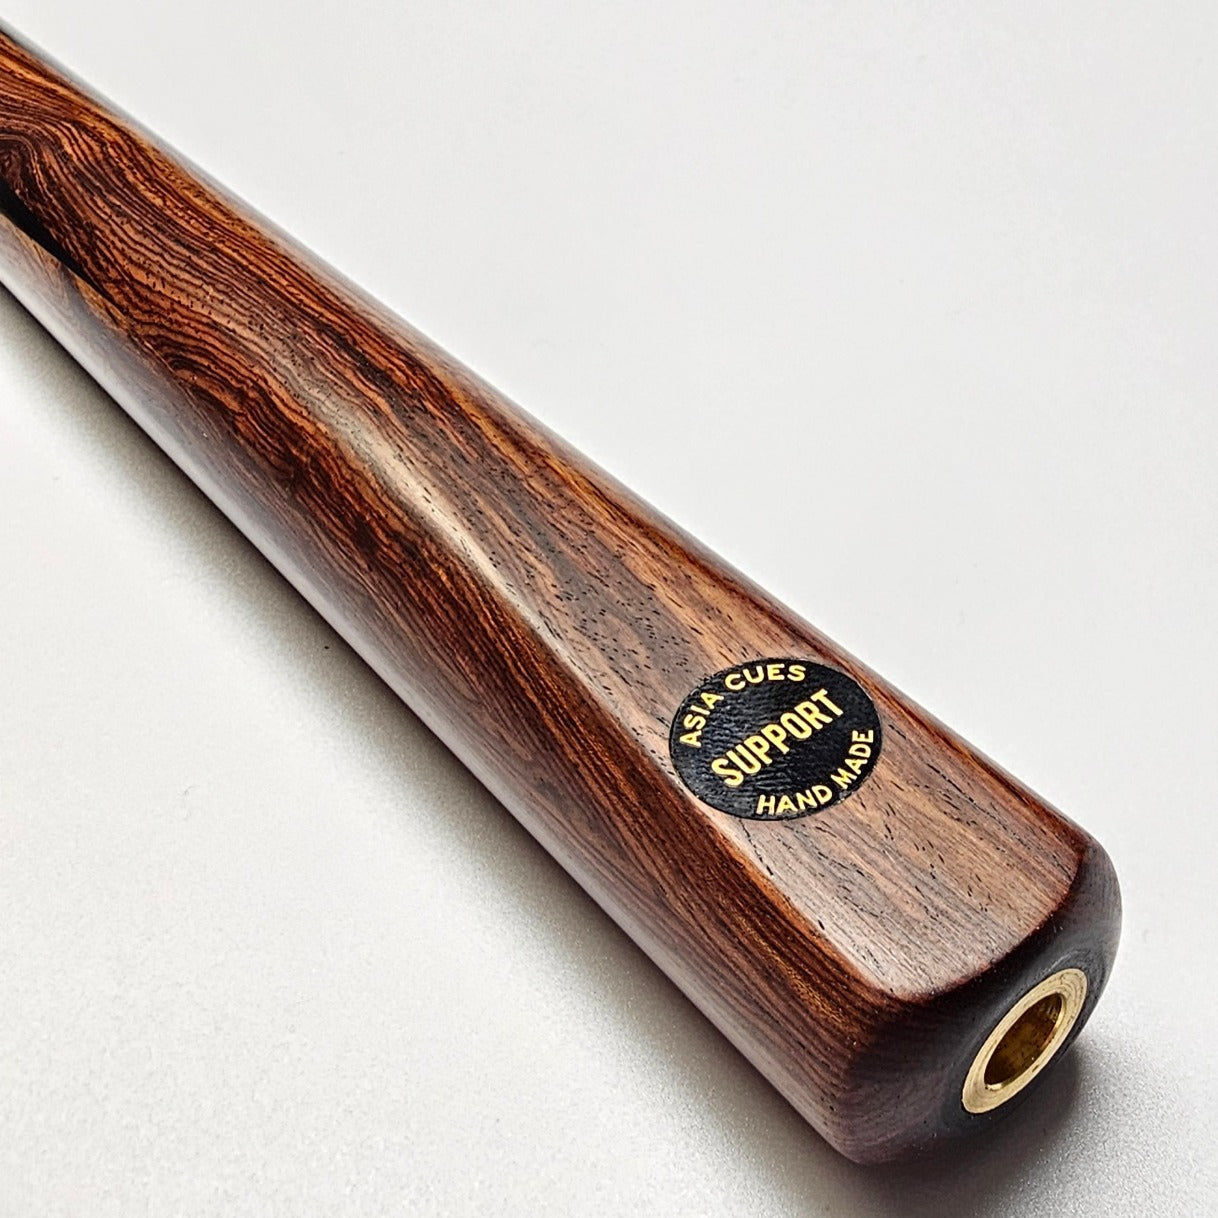 Asia Cues Support - One Piece Pool Cue  Handmade Ebony Butt with 4 lower splices of Exotic Rosewood. Badge View